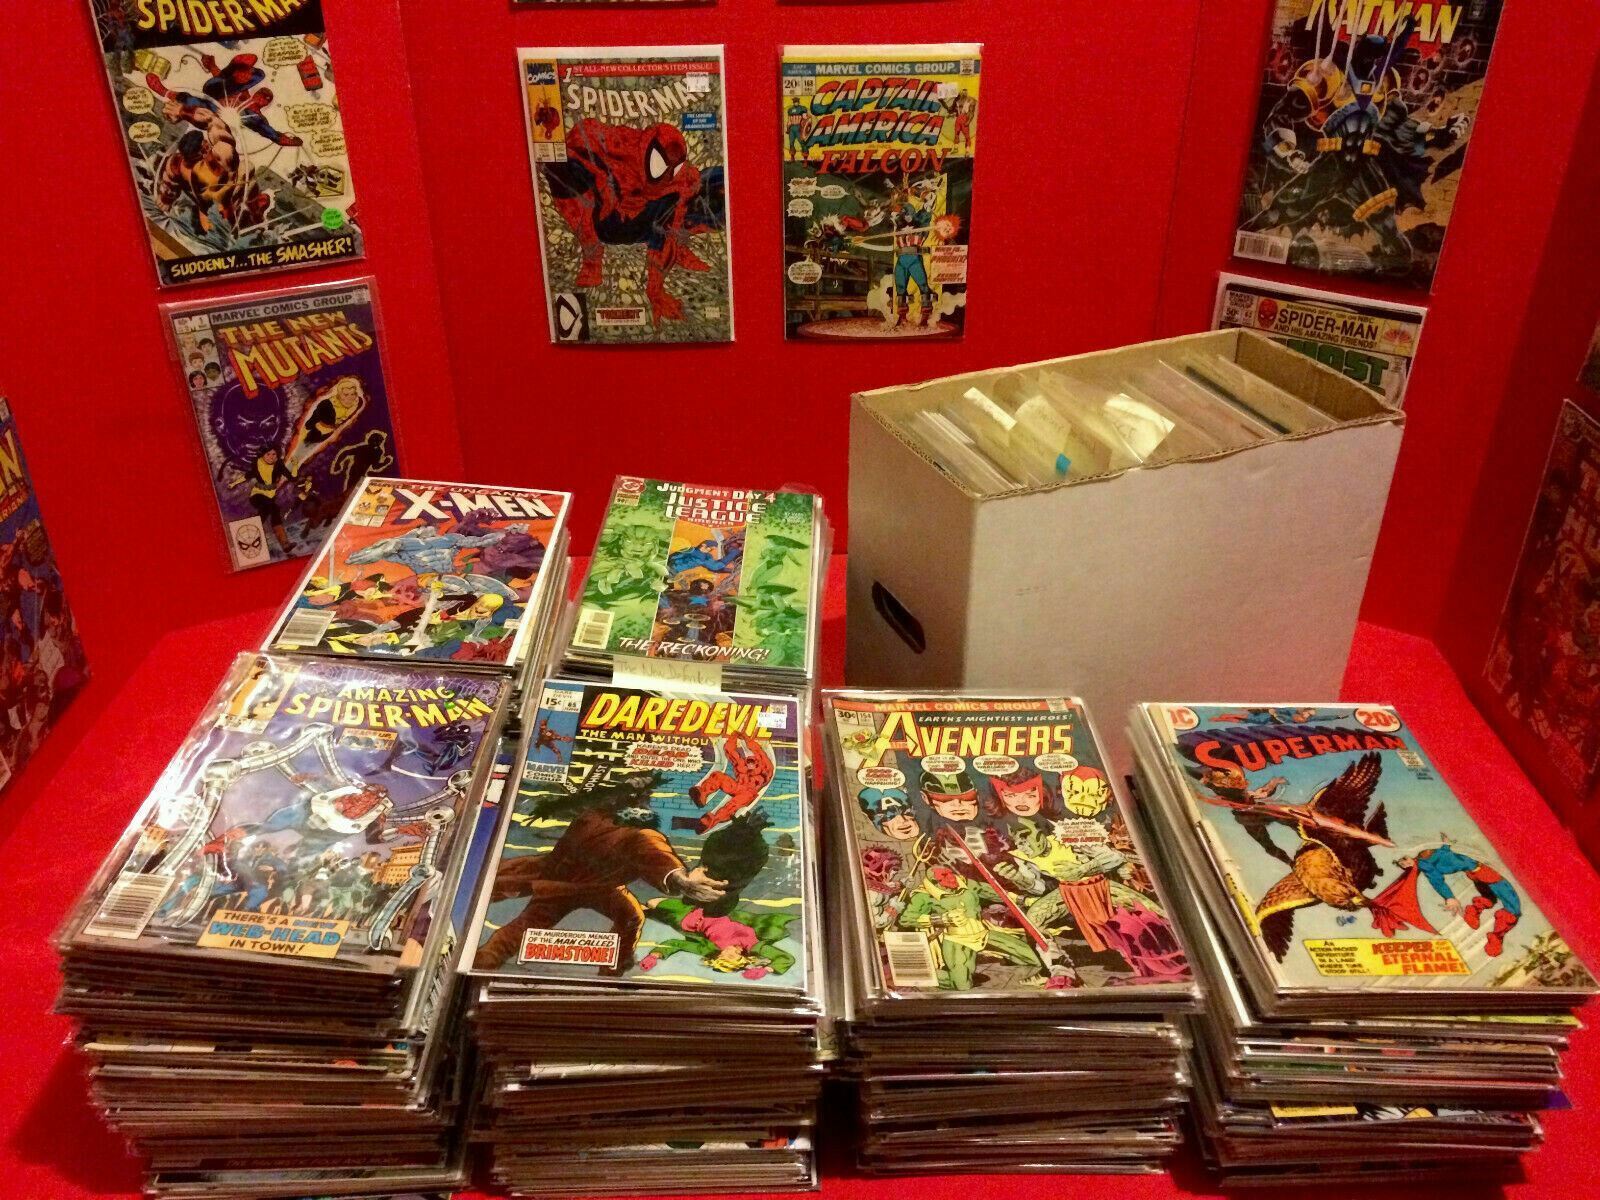 HUGE 25 COMICS BOOK LOT-MARVEL, DC, INDIES VF+ to NM+ All Bagged and Boarded